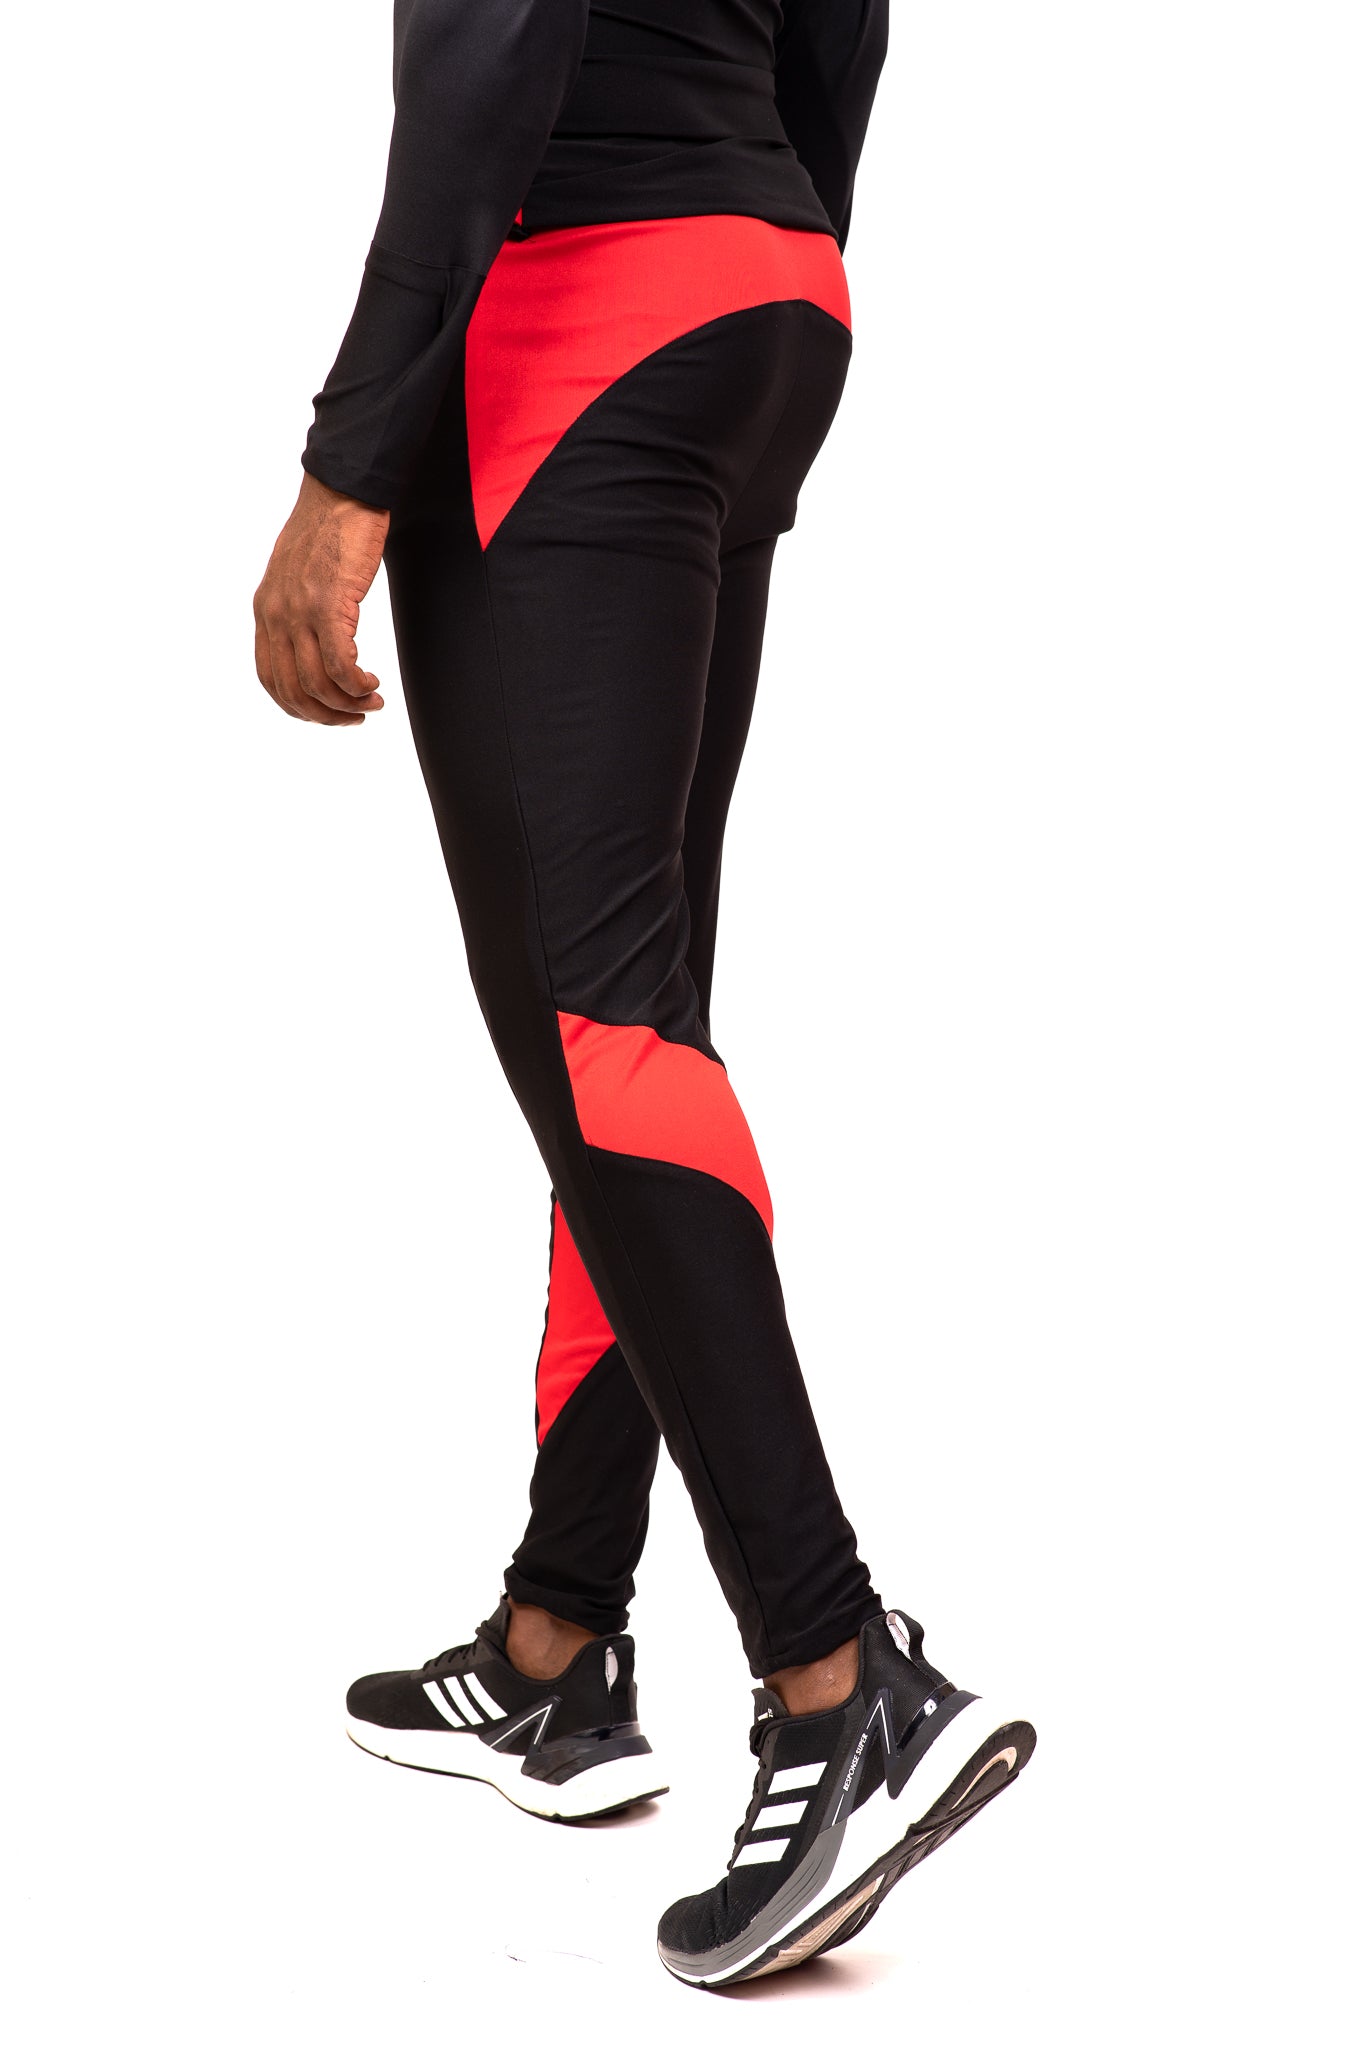 Sportswear Tights For Men | Fitness Tights For Gym - OMG